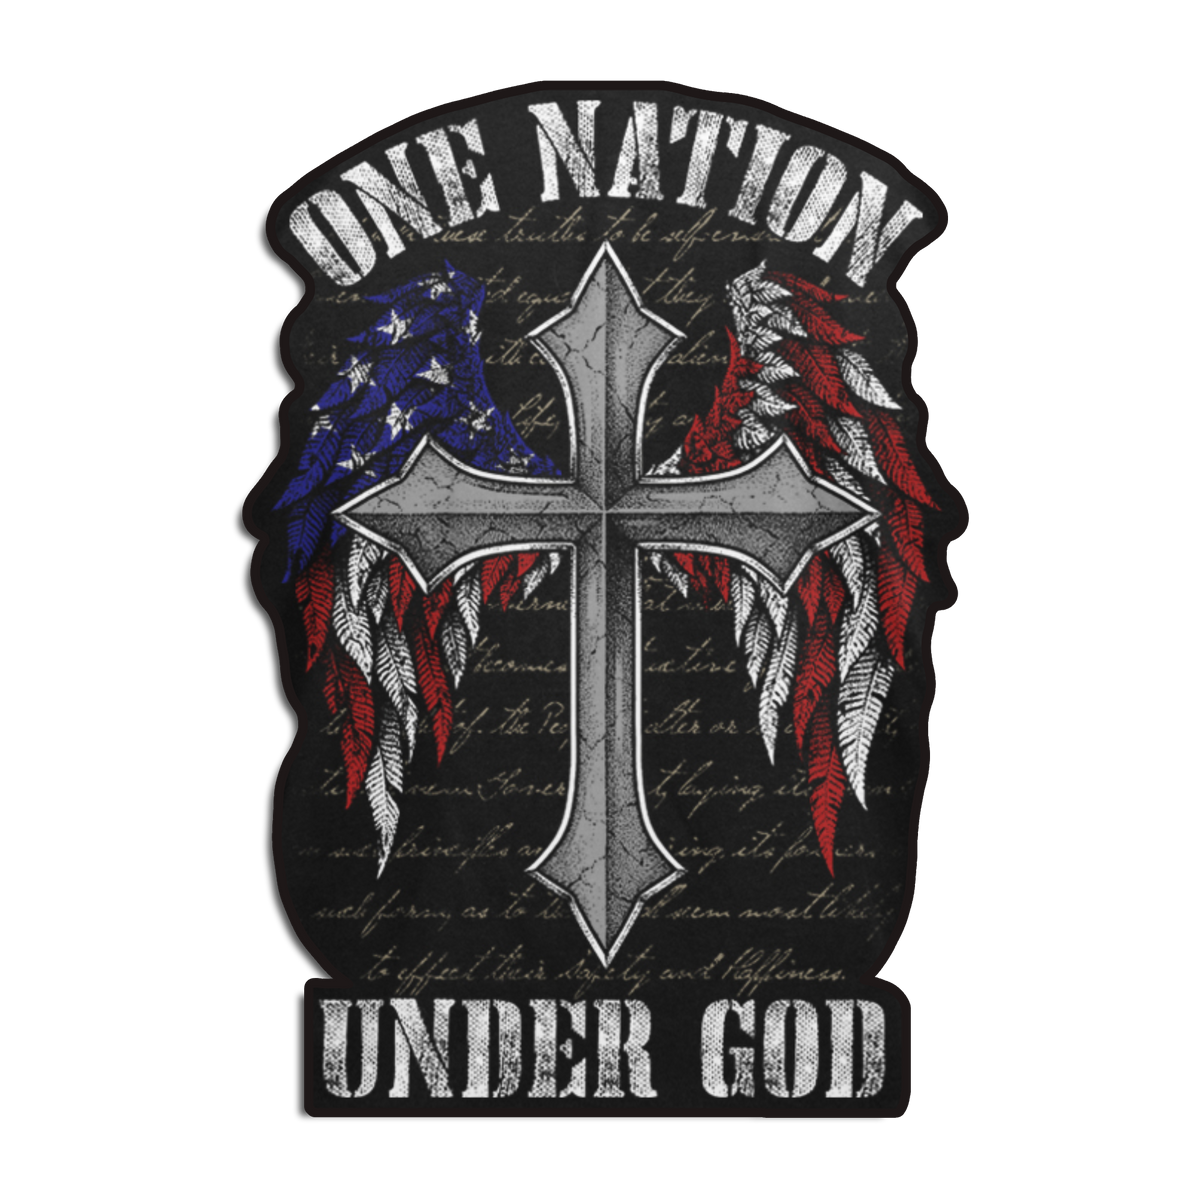 One Nation Under God Decal